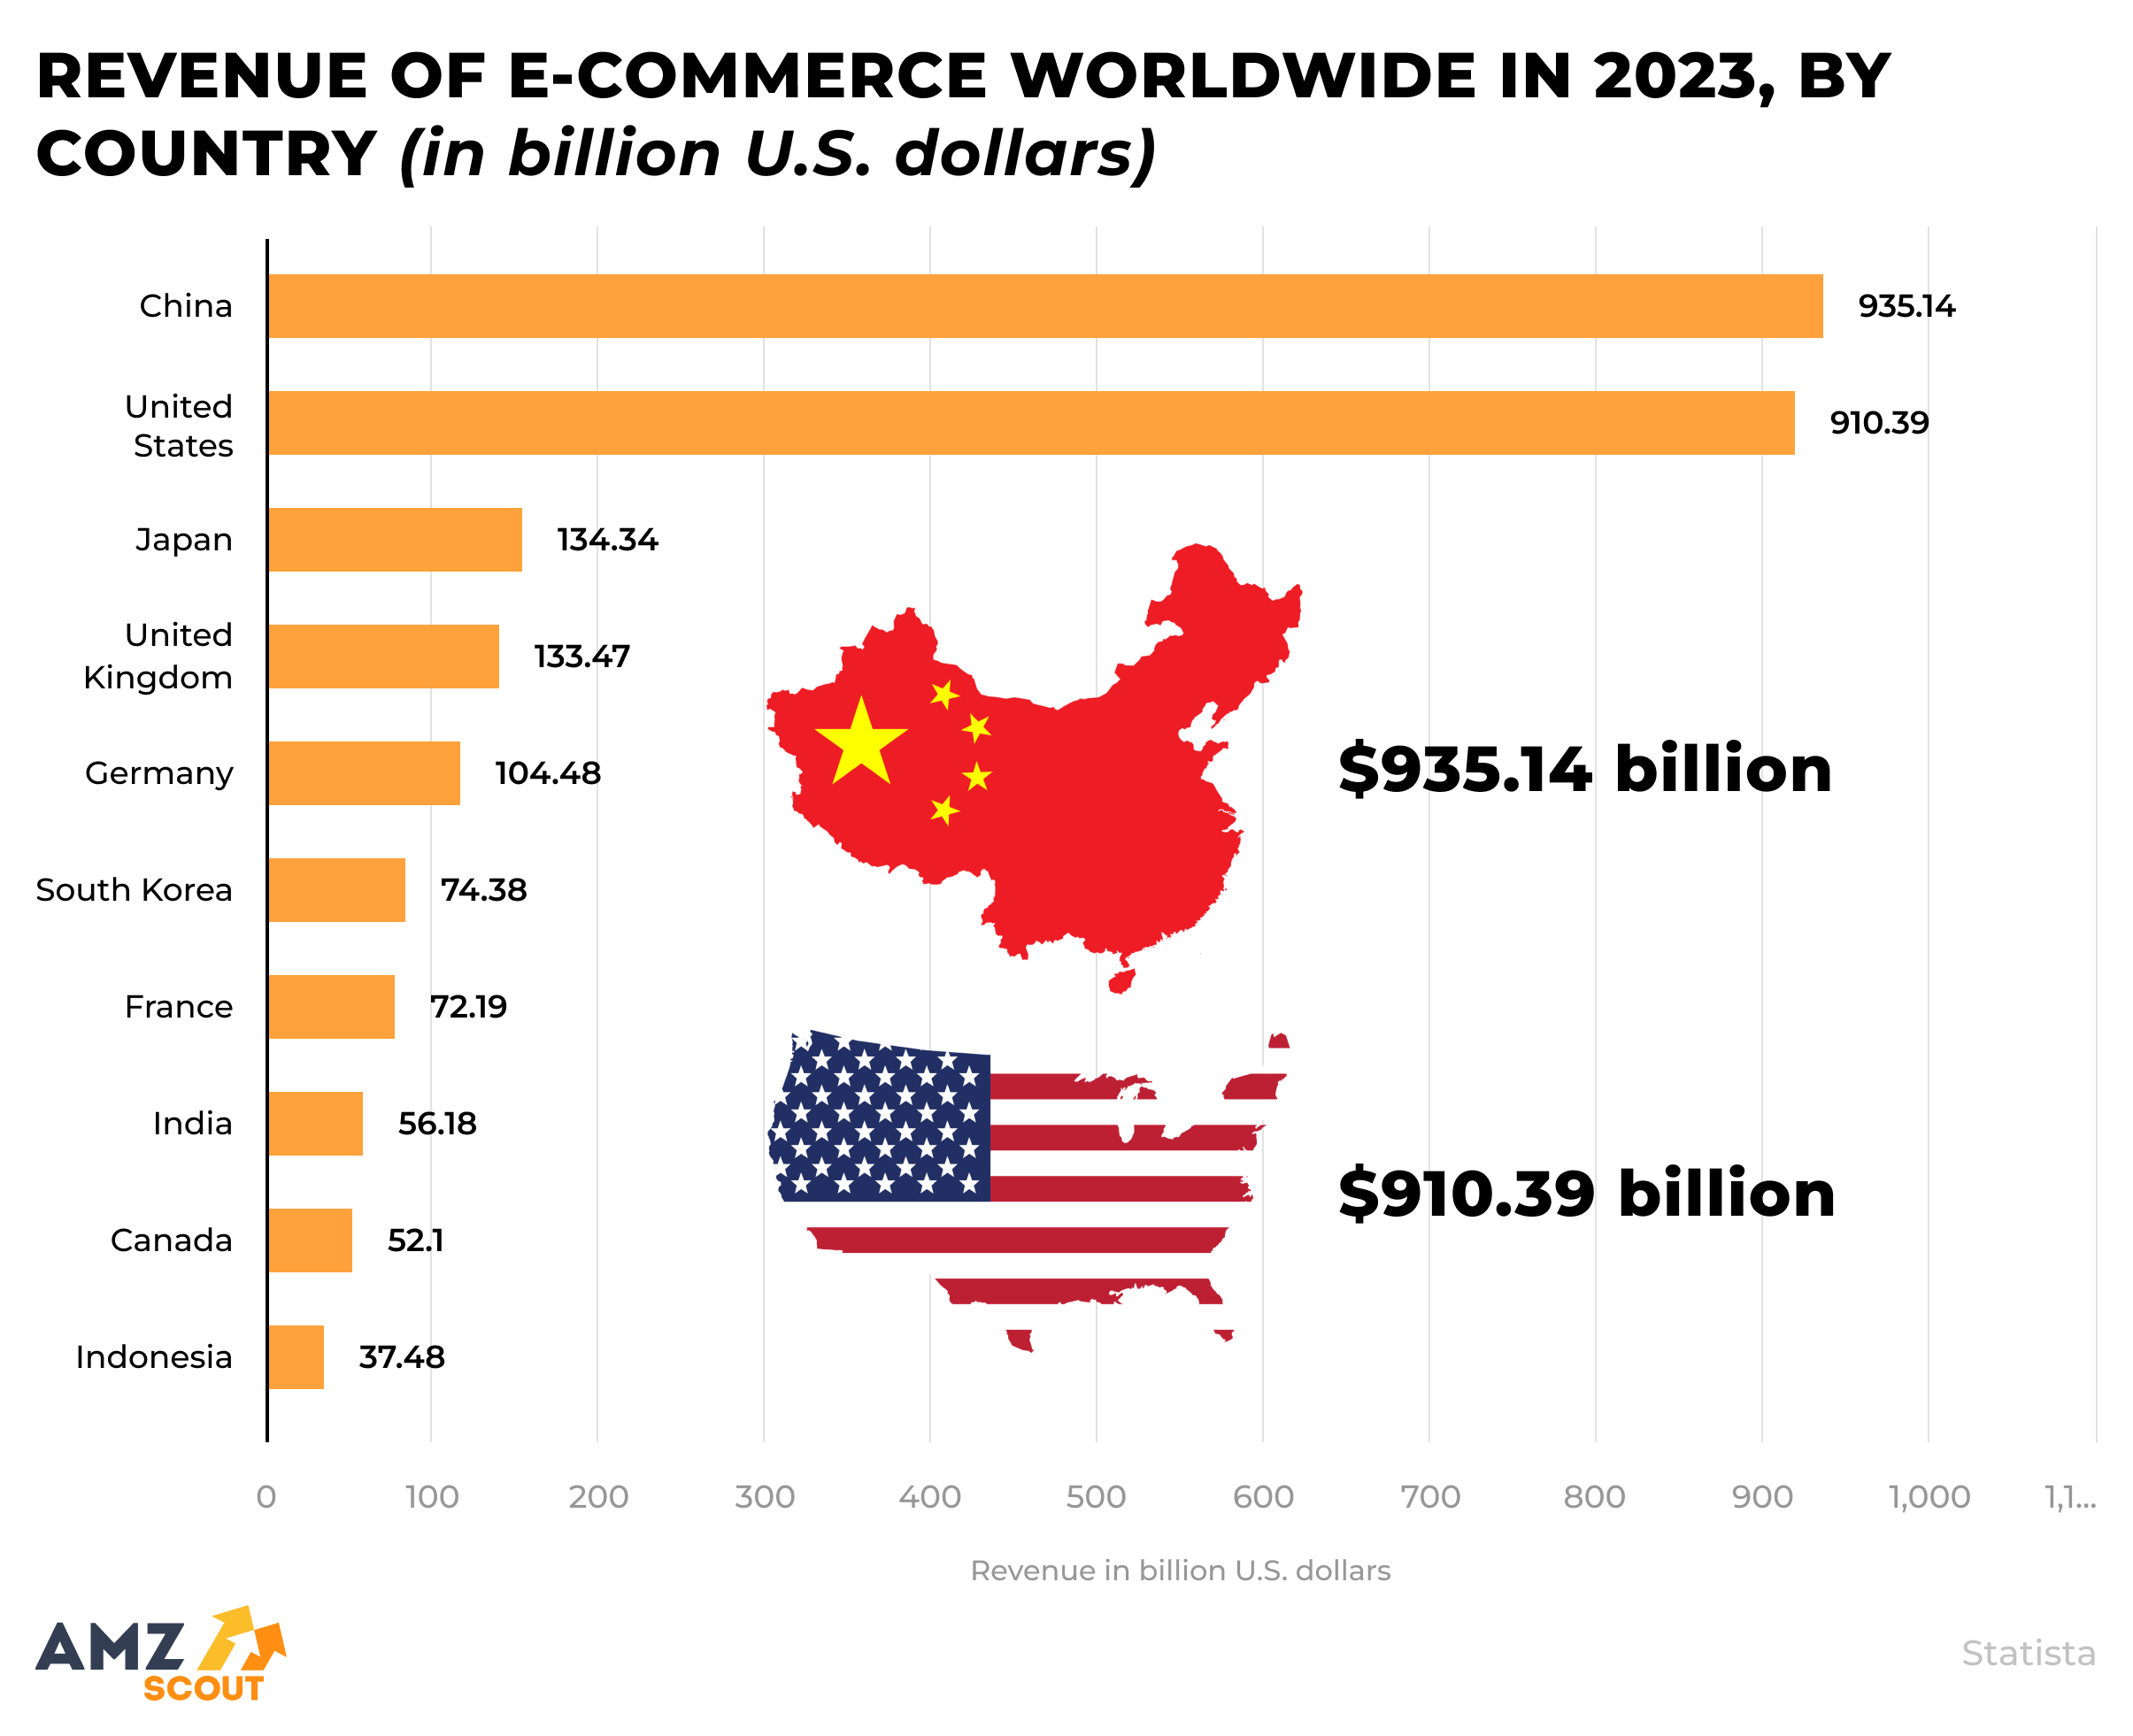 With revenue of $935.14 billion, China led the global eCommerce market in 2023. The US closely followed China with $910.39 billion.